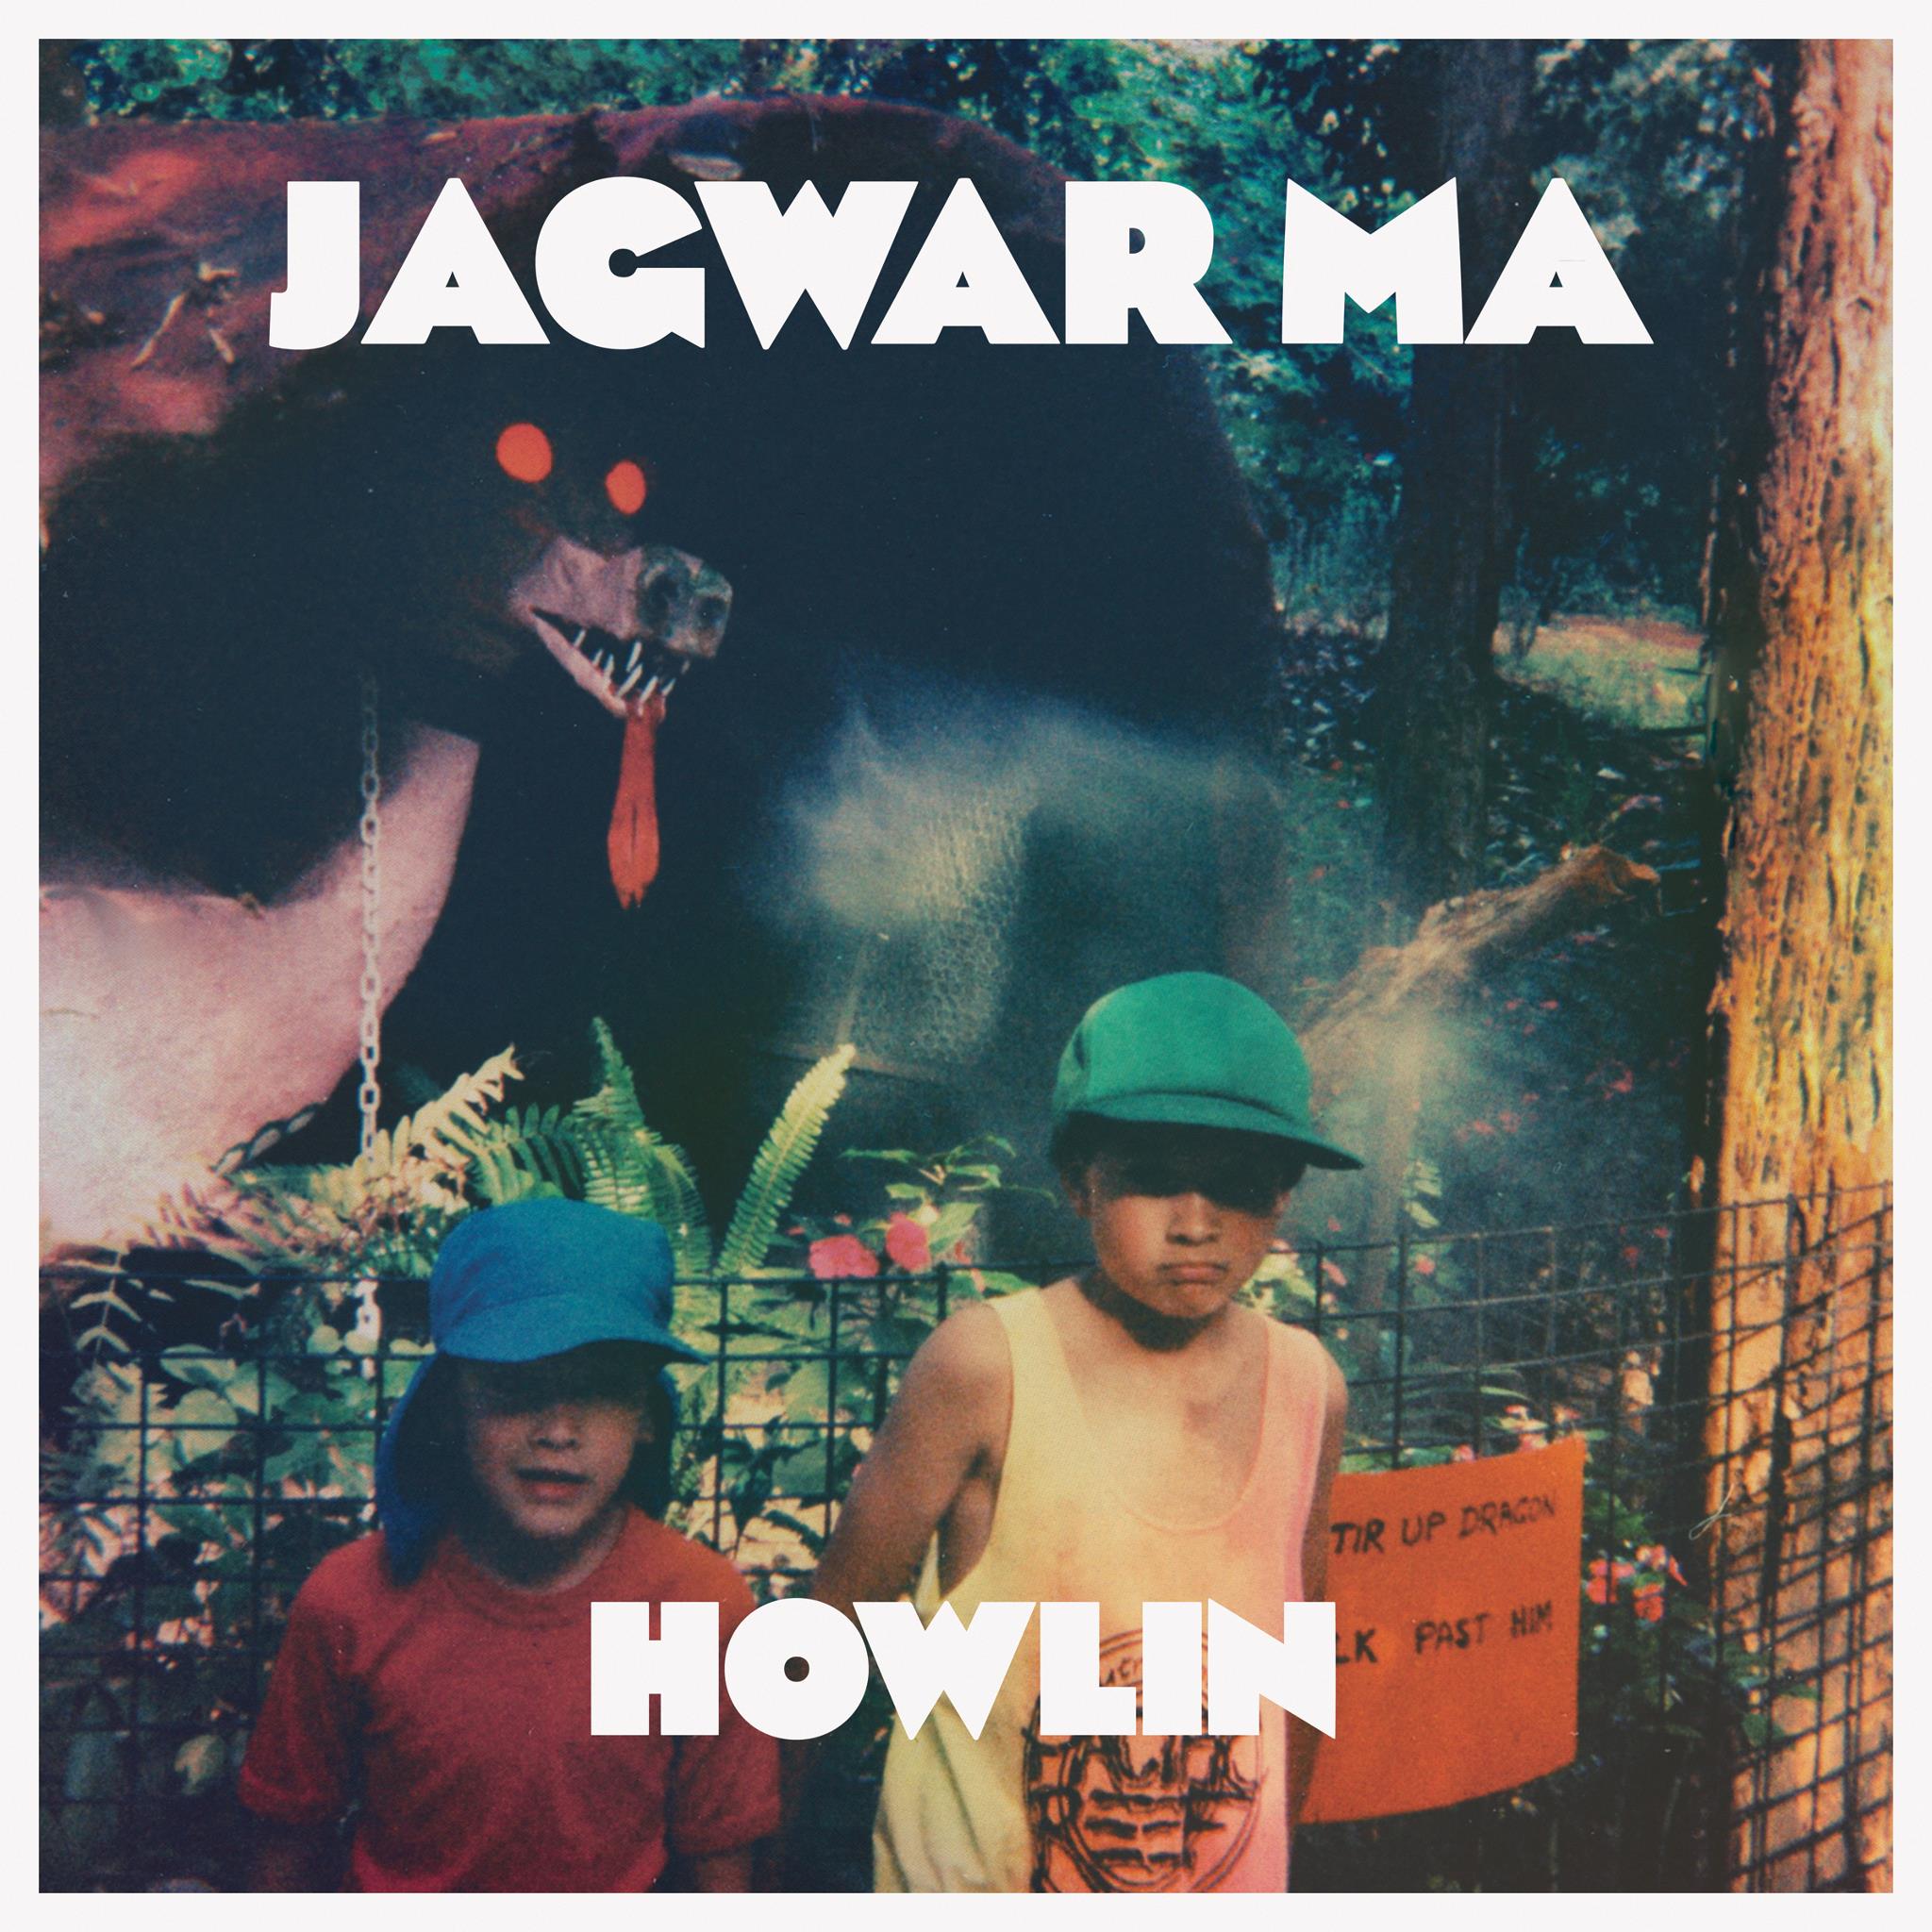 News Added Apr 25, 2013 Jagwar Ma's debut album from the depths of Sydney, rural France, Berlin and some places in between. Submitted By Ned Track list: Added Apr 25, 2013 1. What Love 2. Uncertainty 3. The Throw 4. That Loneliness 5. Come Save Me 6. Four 7. Let Her Go 8. Man I […]